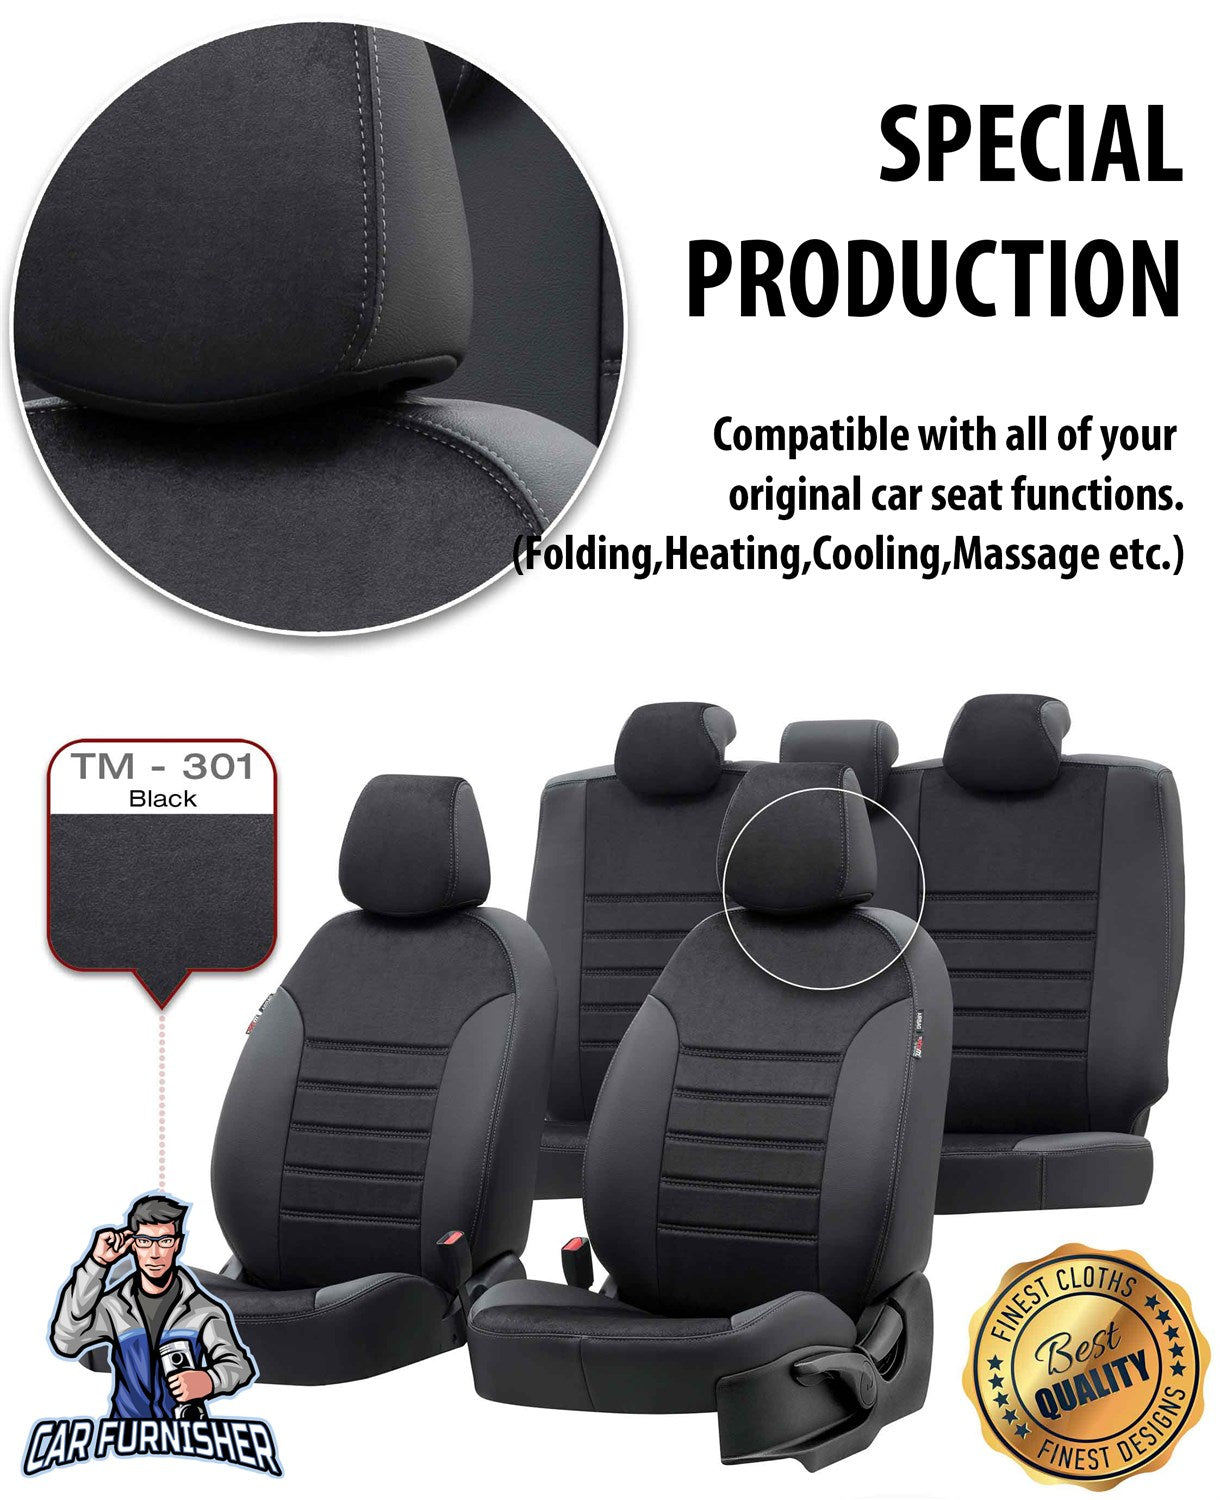 Mercedes X-Class Seat Covers Milano Suede Design Smoked Leather & Suede Fabric